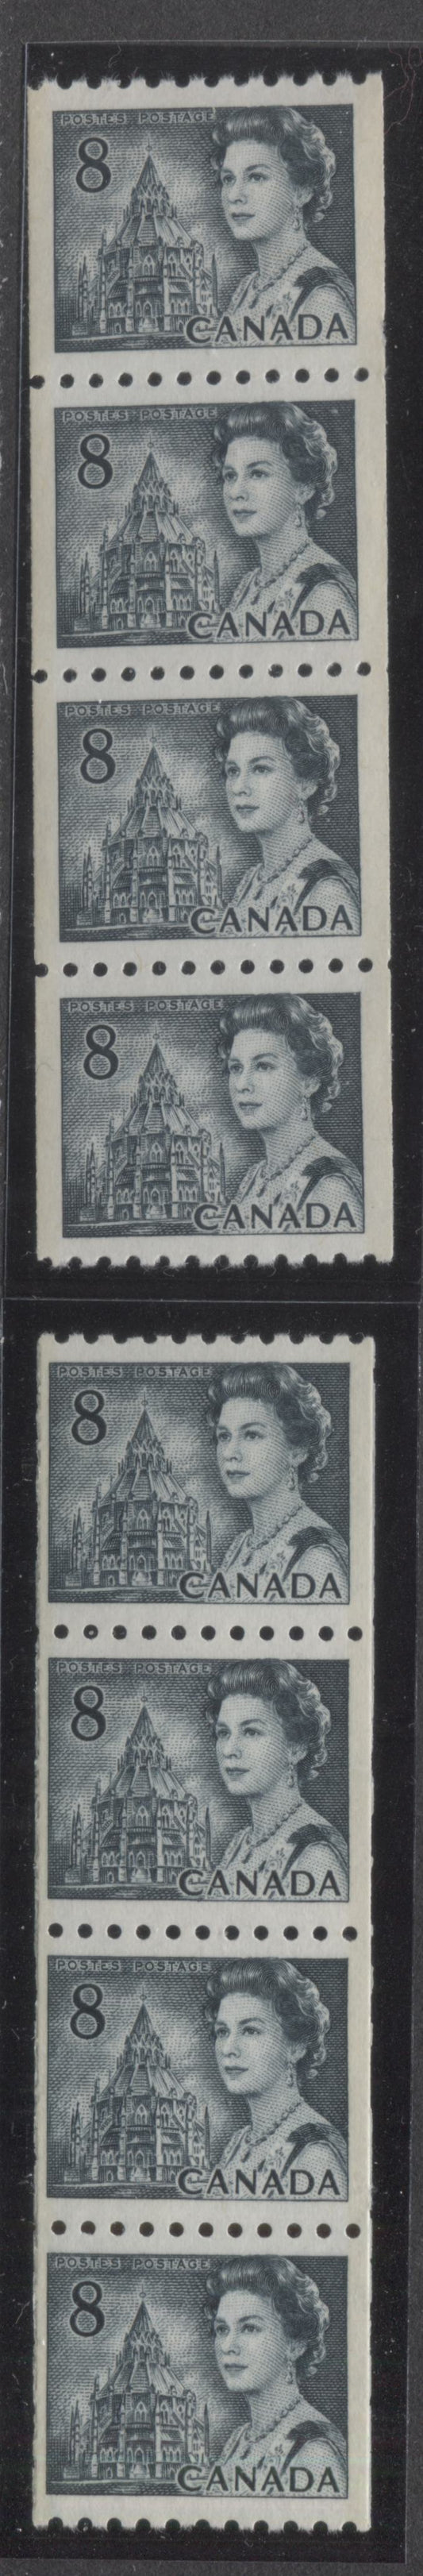 Lot 69 Canada #550pv,pvi 8c Slate Queen Elizabeth II, 1967-1973 Centennials, 2 VFNH GT2 Tagged Coil Strips Of 4 On White DF2 & LF3-fl Papers With PVA Gum, 4mm & 3mm OP2